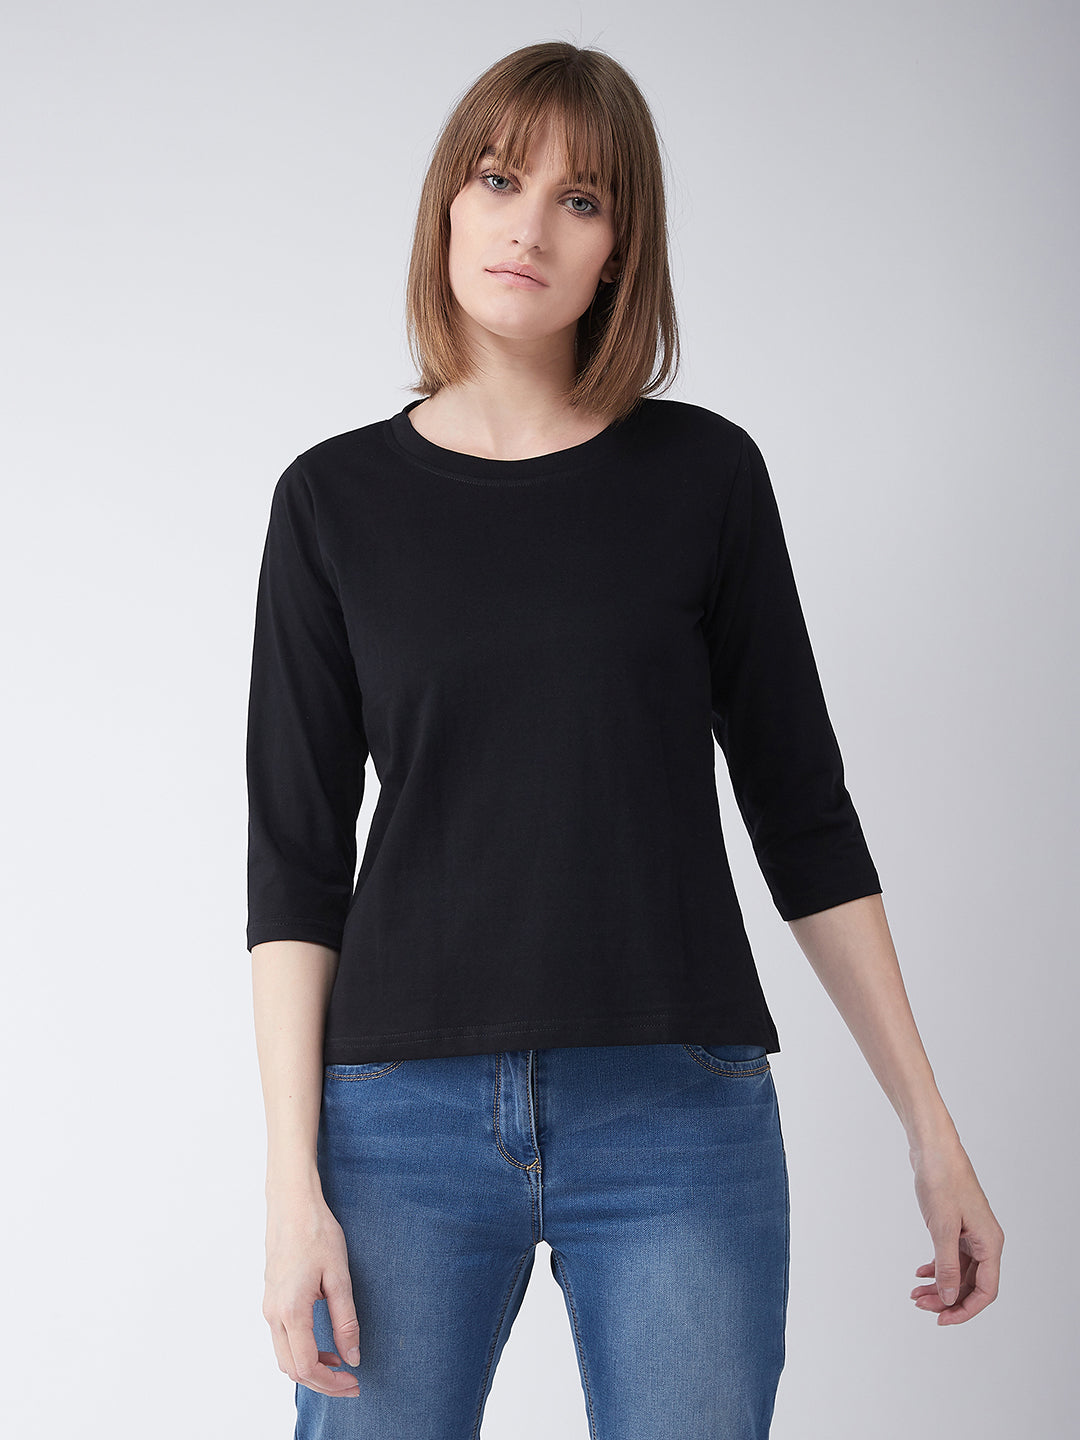 Women's Black Round Neck 3/4 Sleeves Solid Basic Top